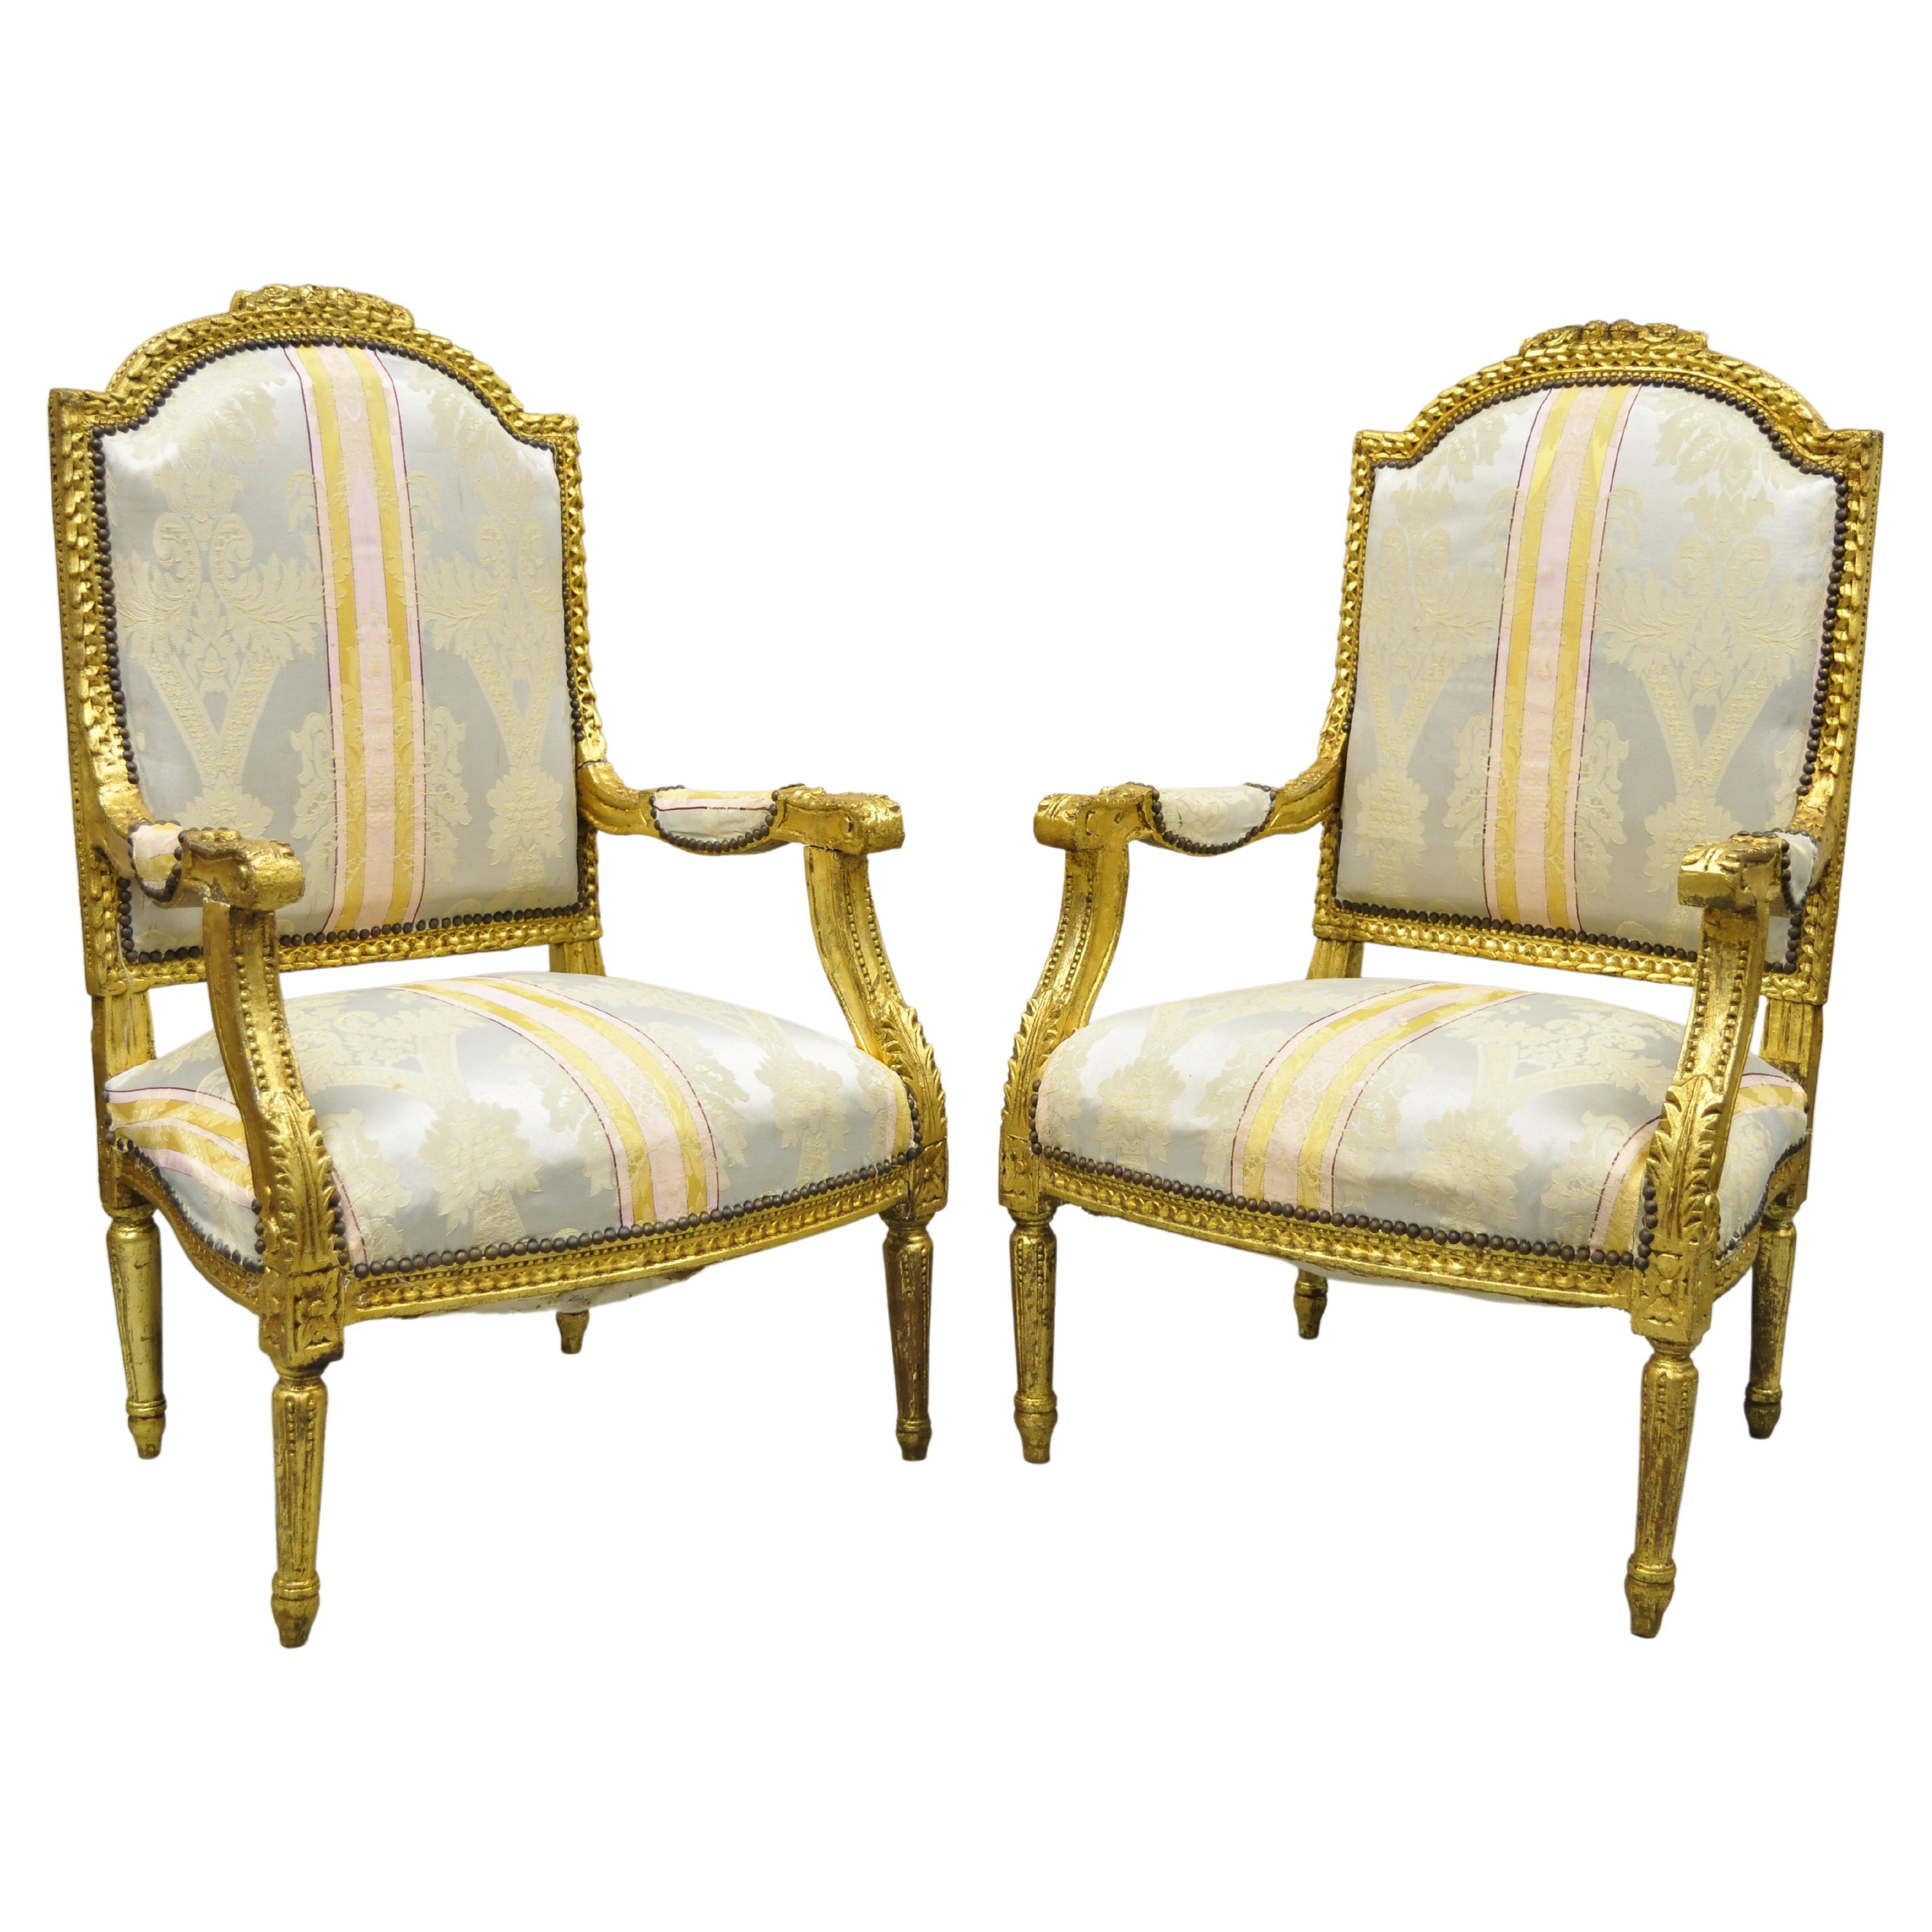 Vintage French Louis XVI Gold Giltwood Upholstered Lounge Chairs 'A', a Pair